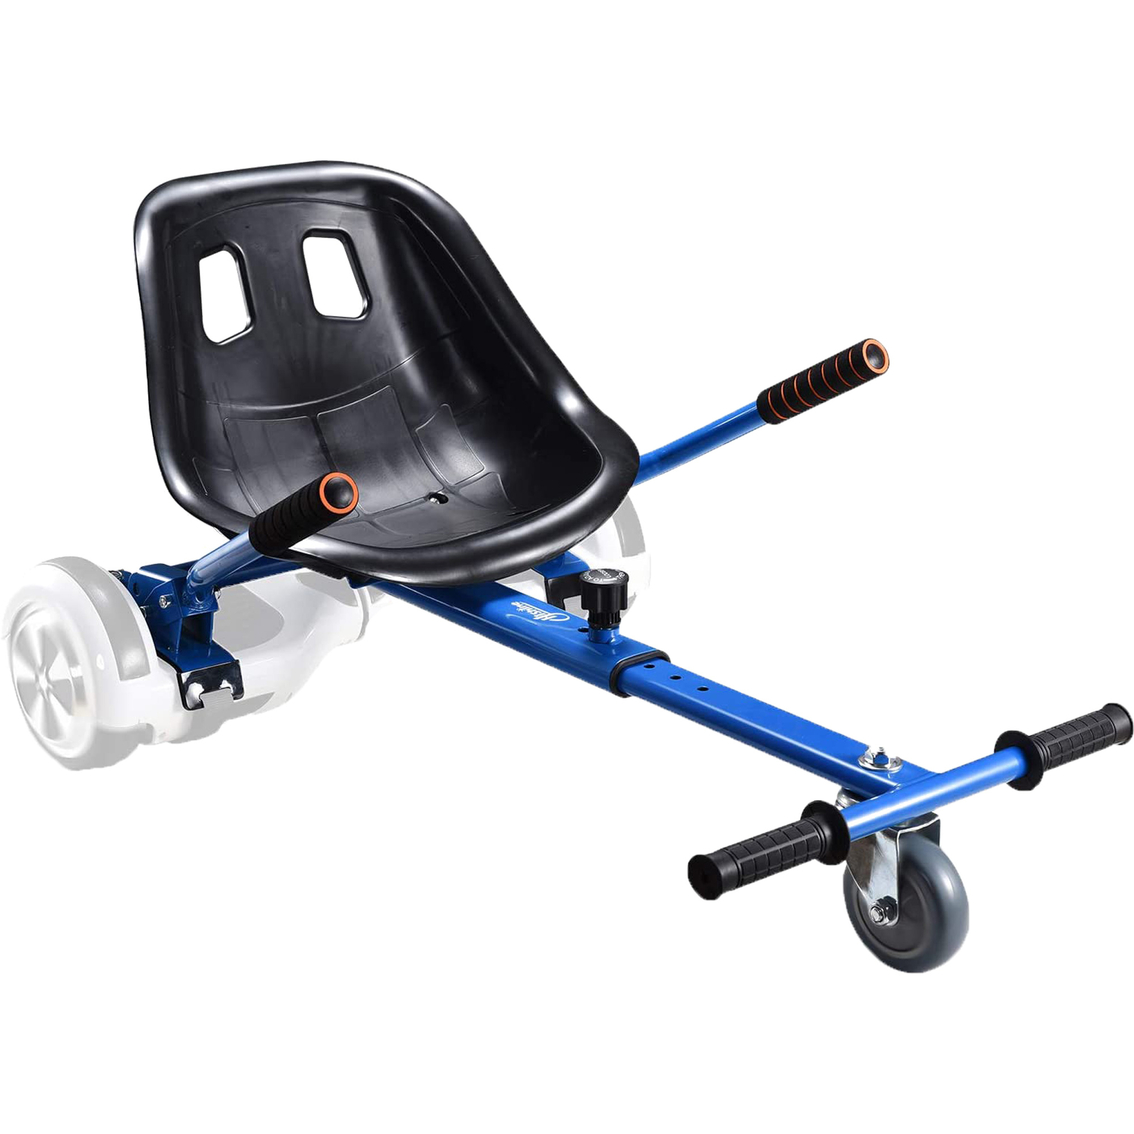 GlareWheel Buggy Attachment for Transforming Hoverboard Scooter into Go Kart - Image 2 of 6